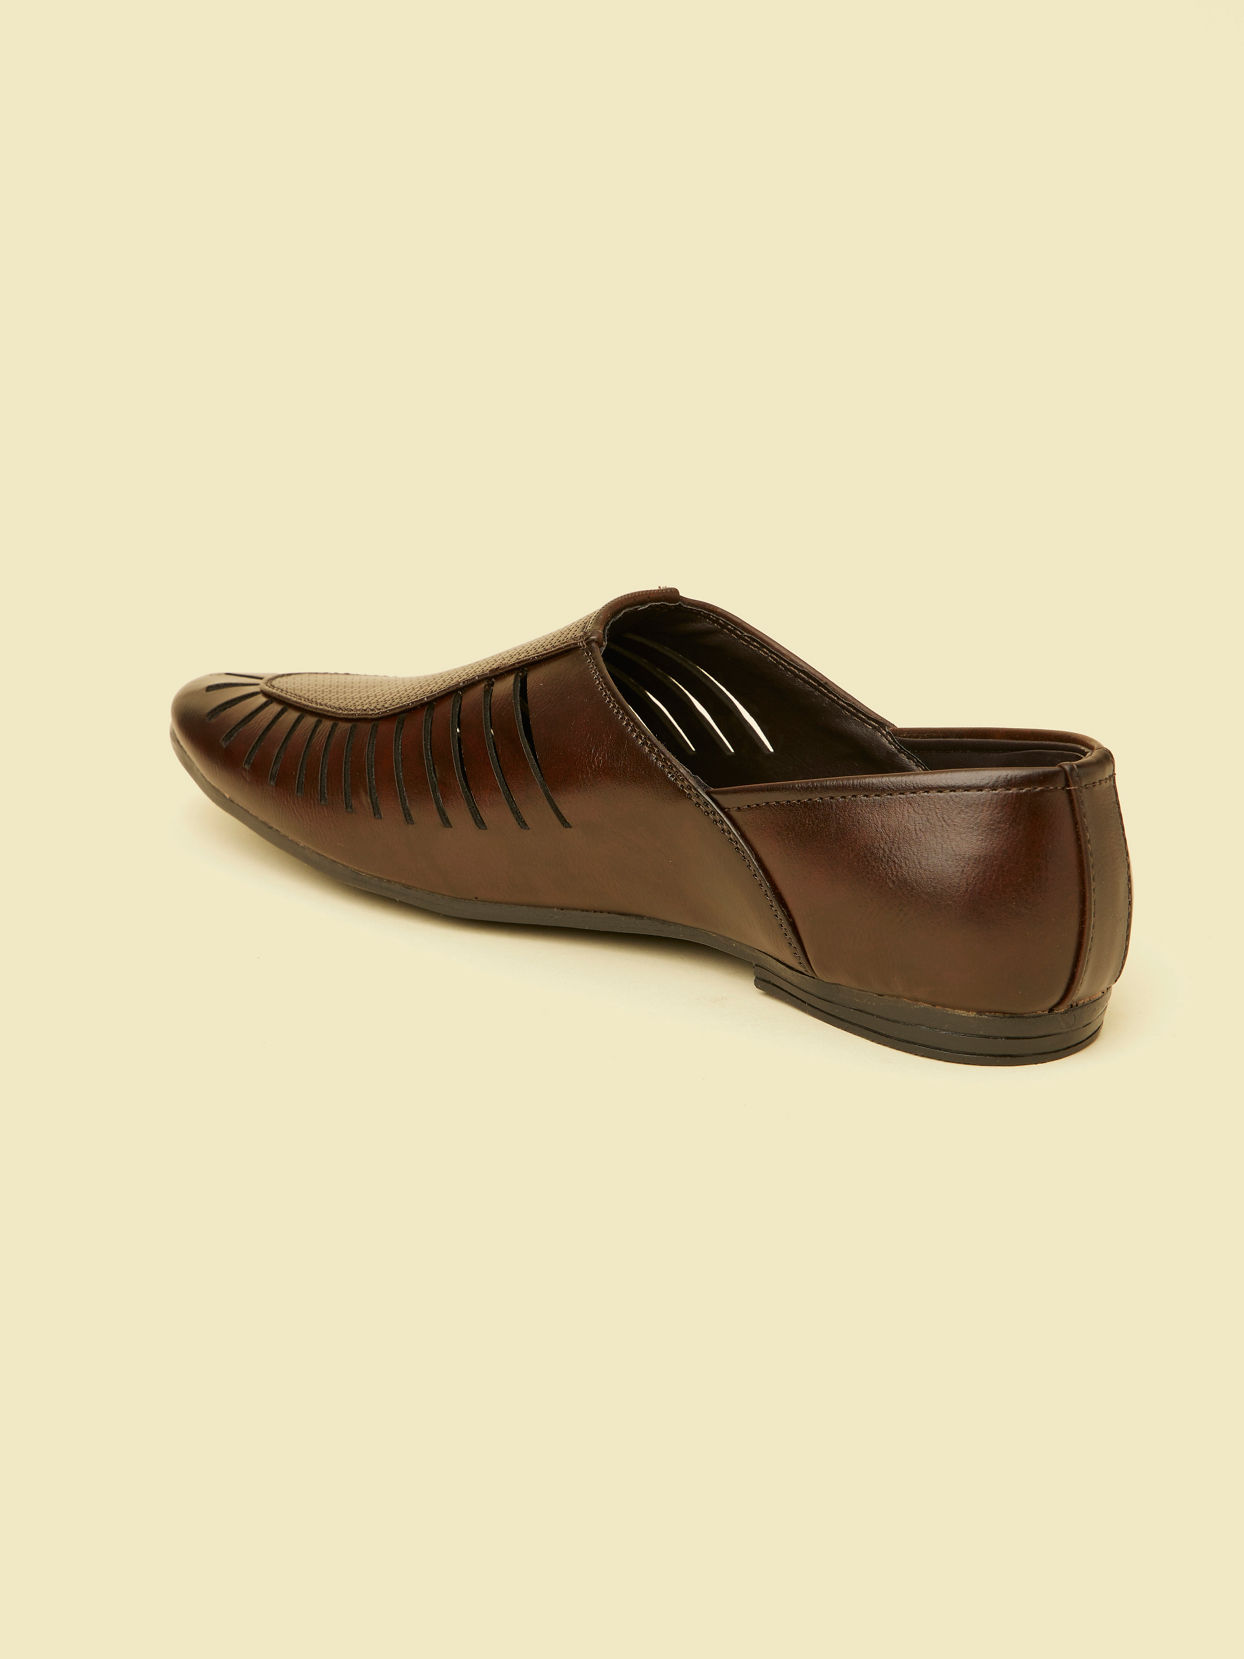 Dark Brown Loafers Style Shoes image number 4